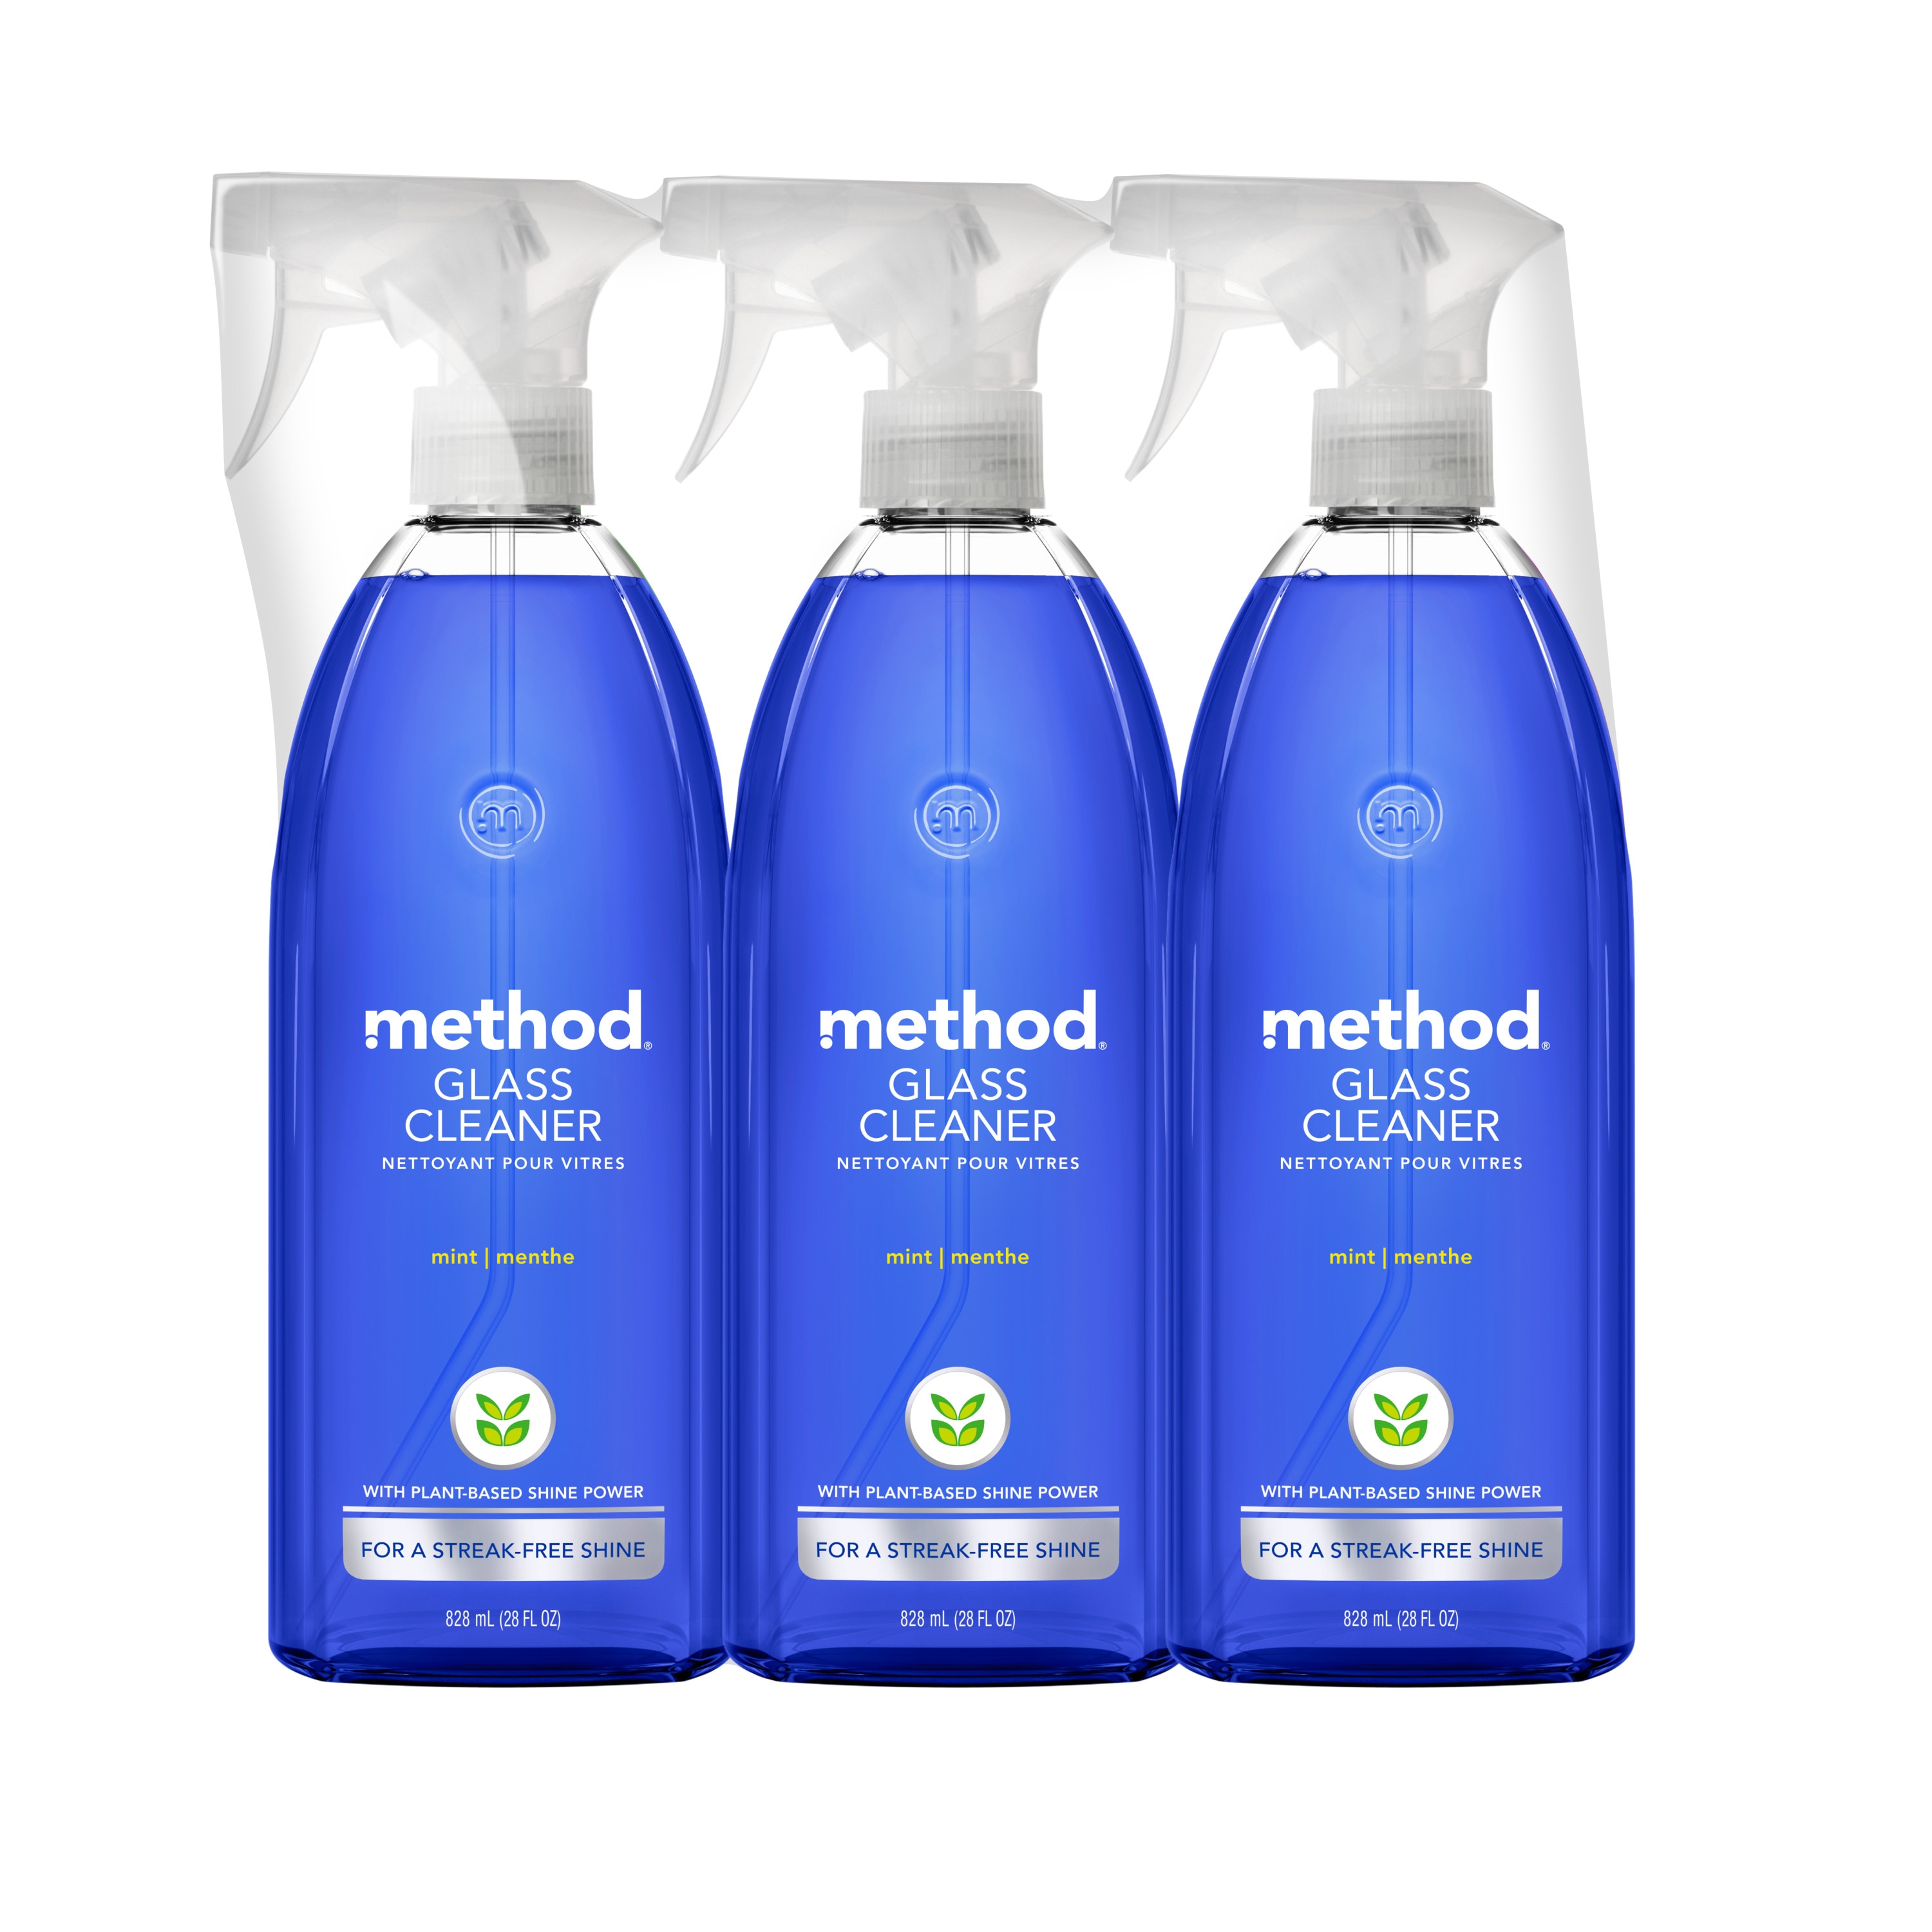 Method Eucalyptus Mint Cleaning Products Foaming Bathroom Cleaner Spray  Bottle - 28 fl oz